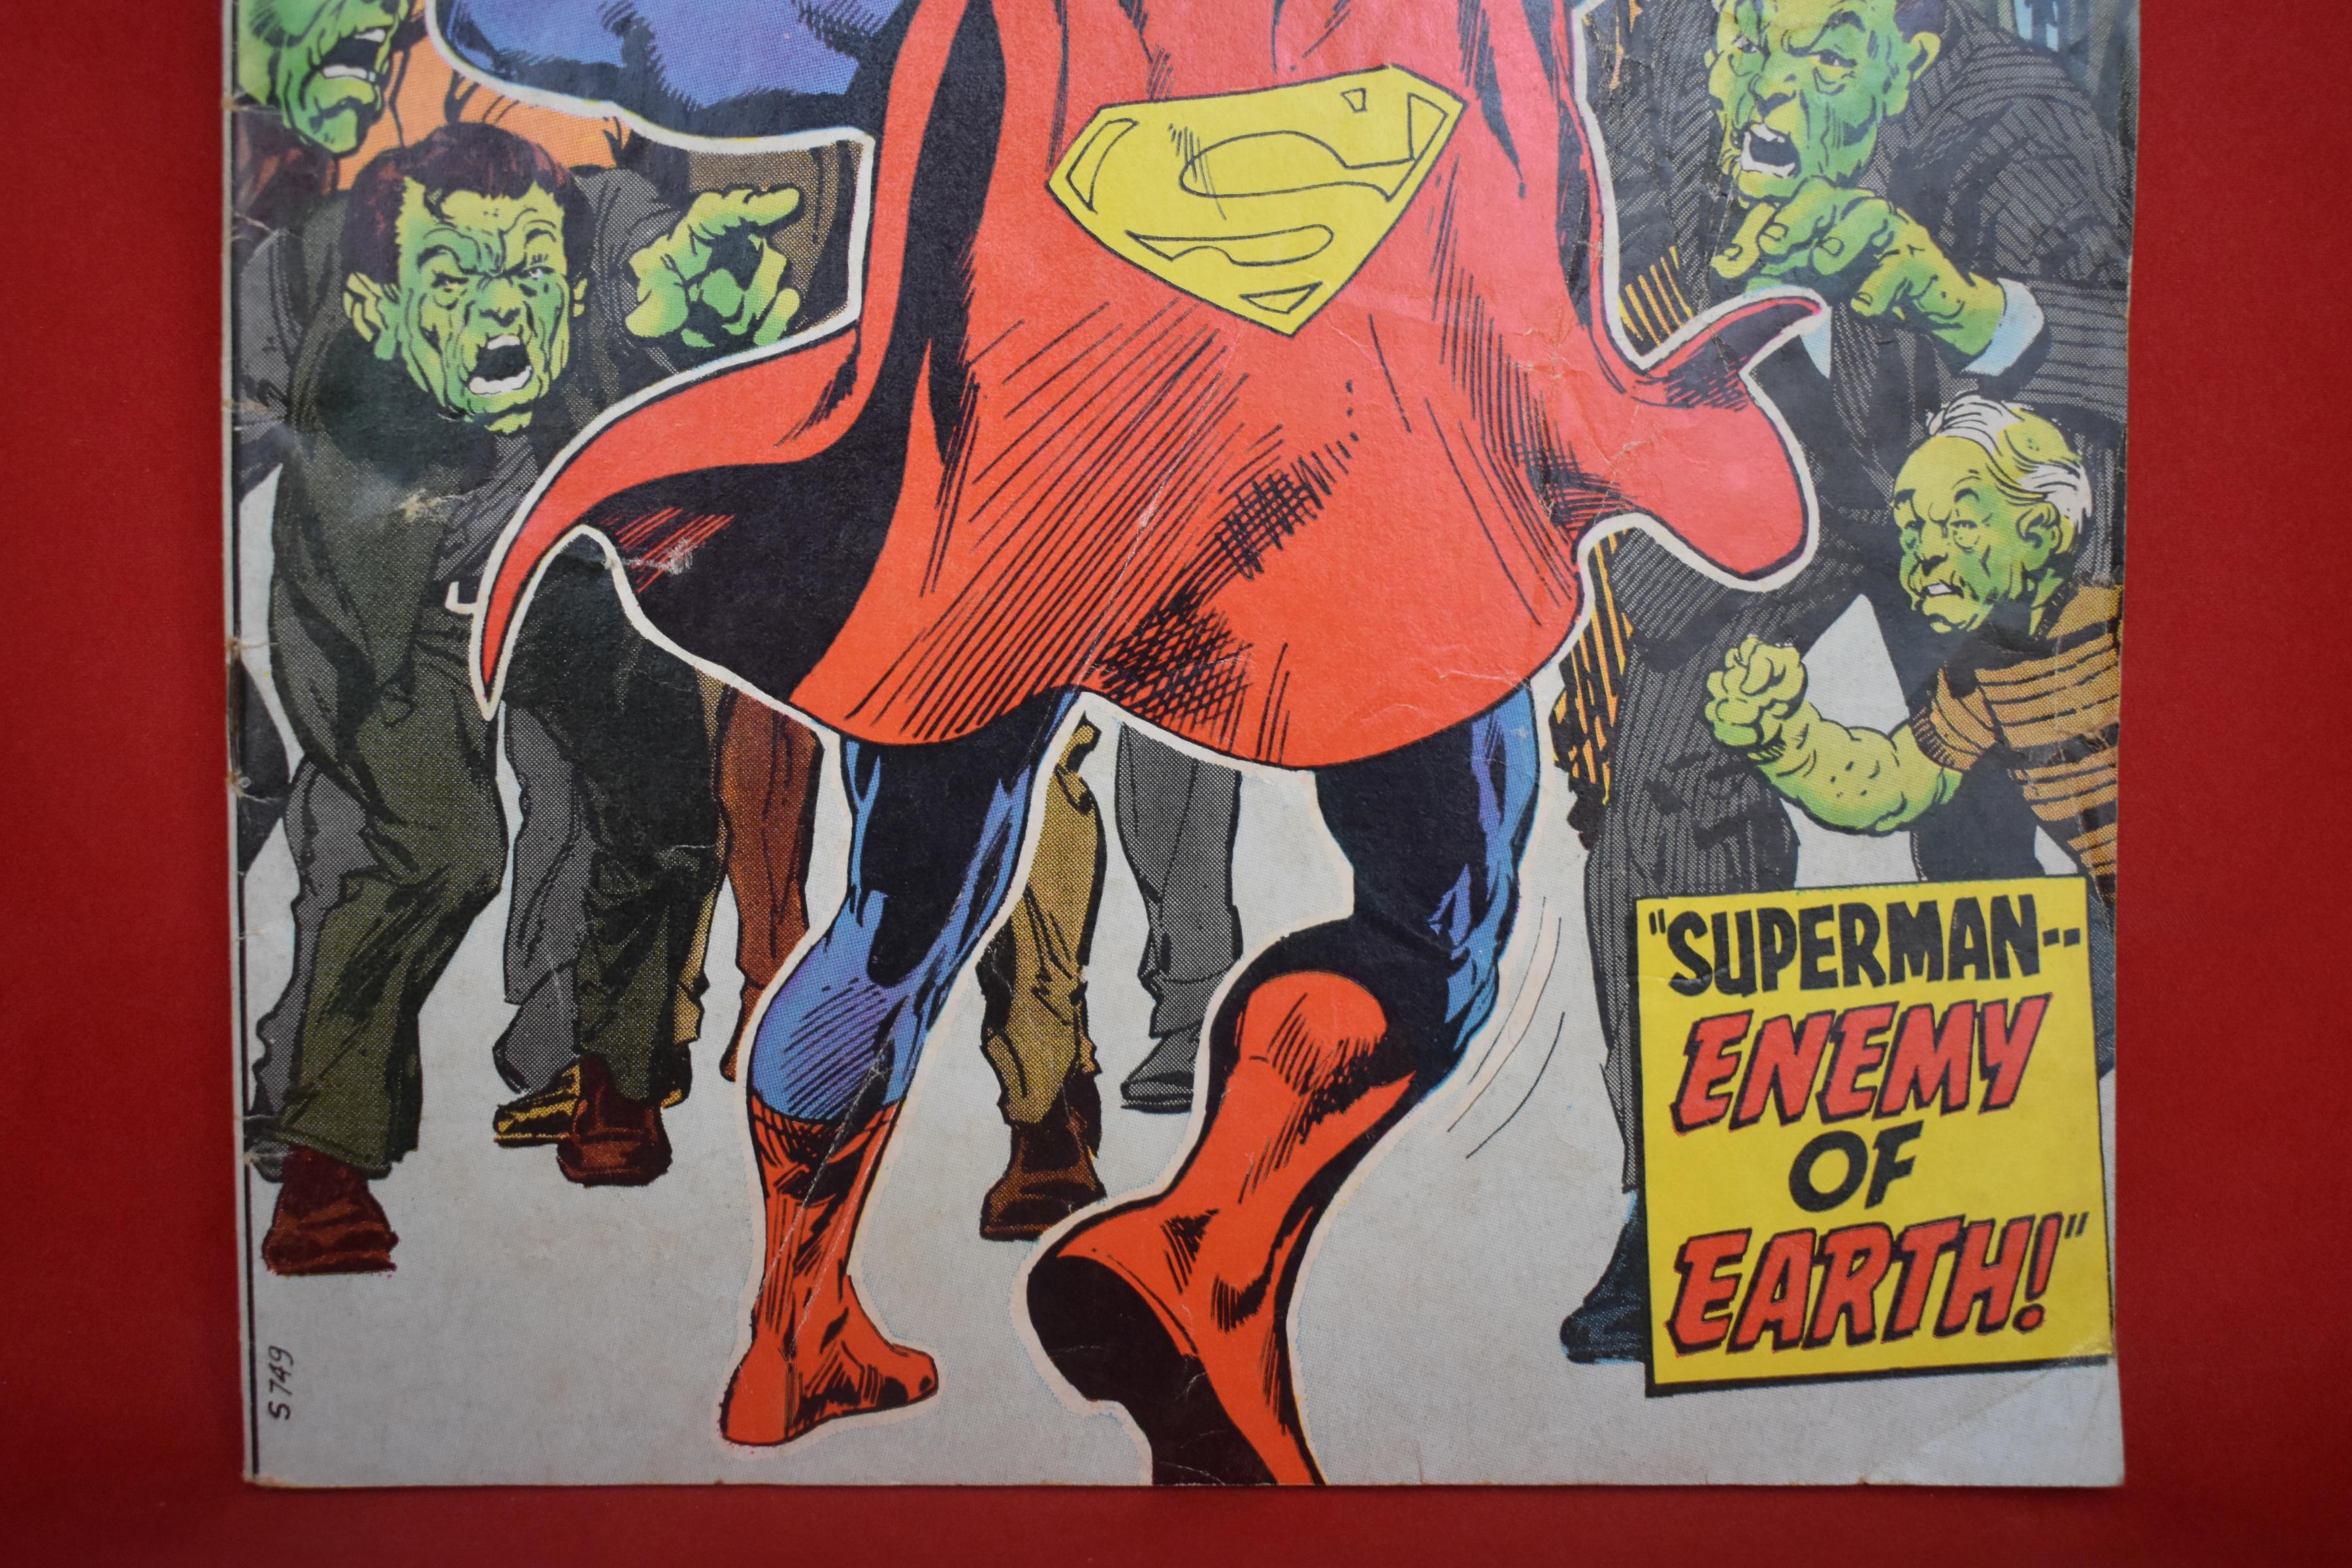 SUPERMAN #237 | ENEMY OF EARTH - CLASSIC NEAL ADAMS | *SOLID -CREASING - STAINING - SEE PICS*